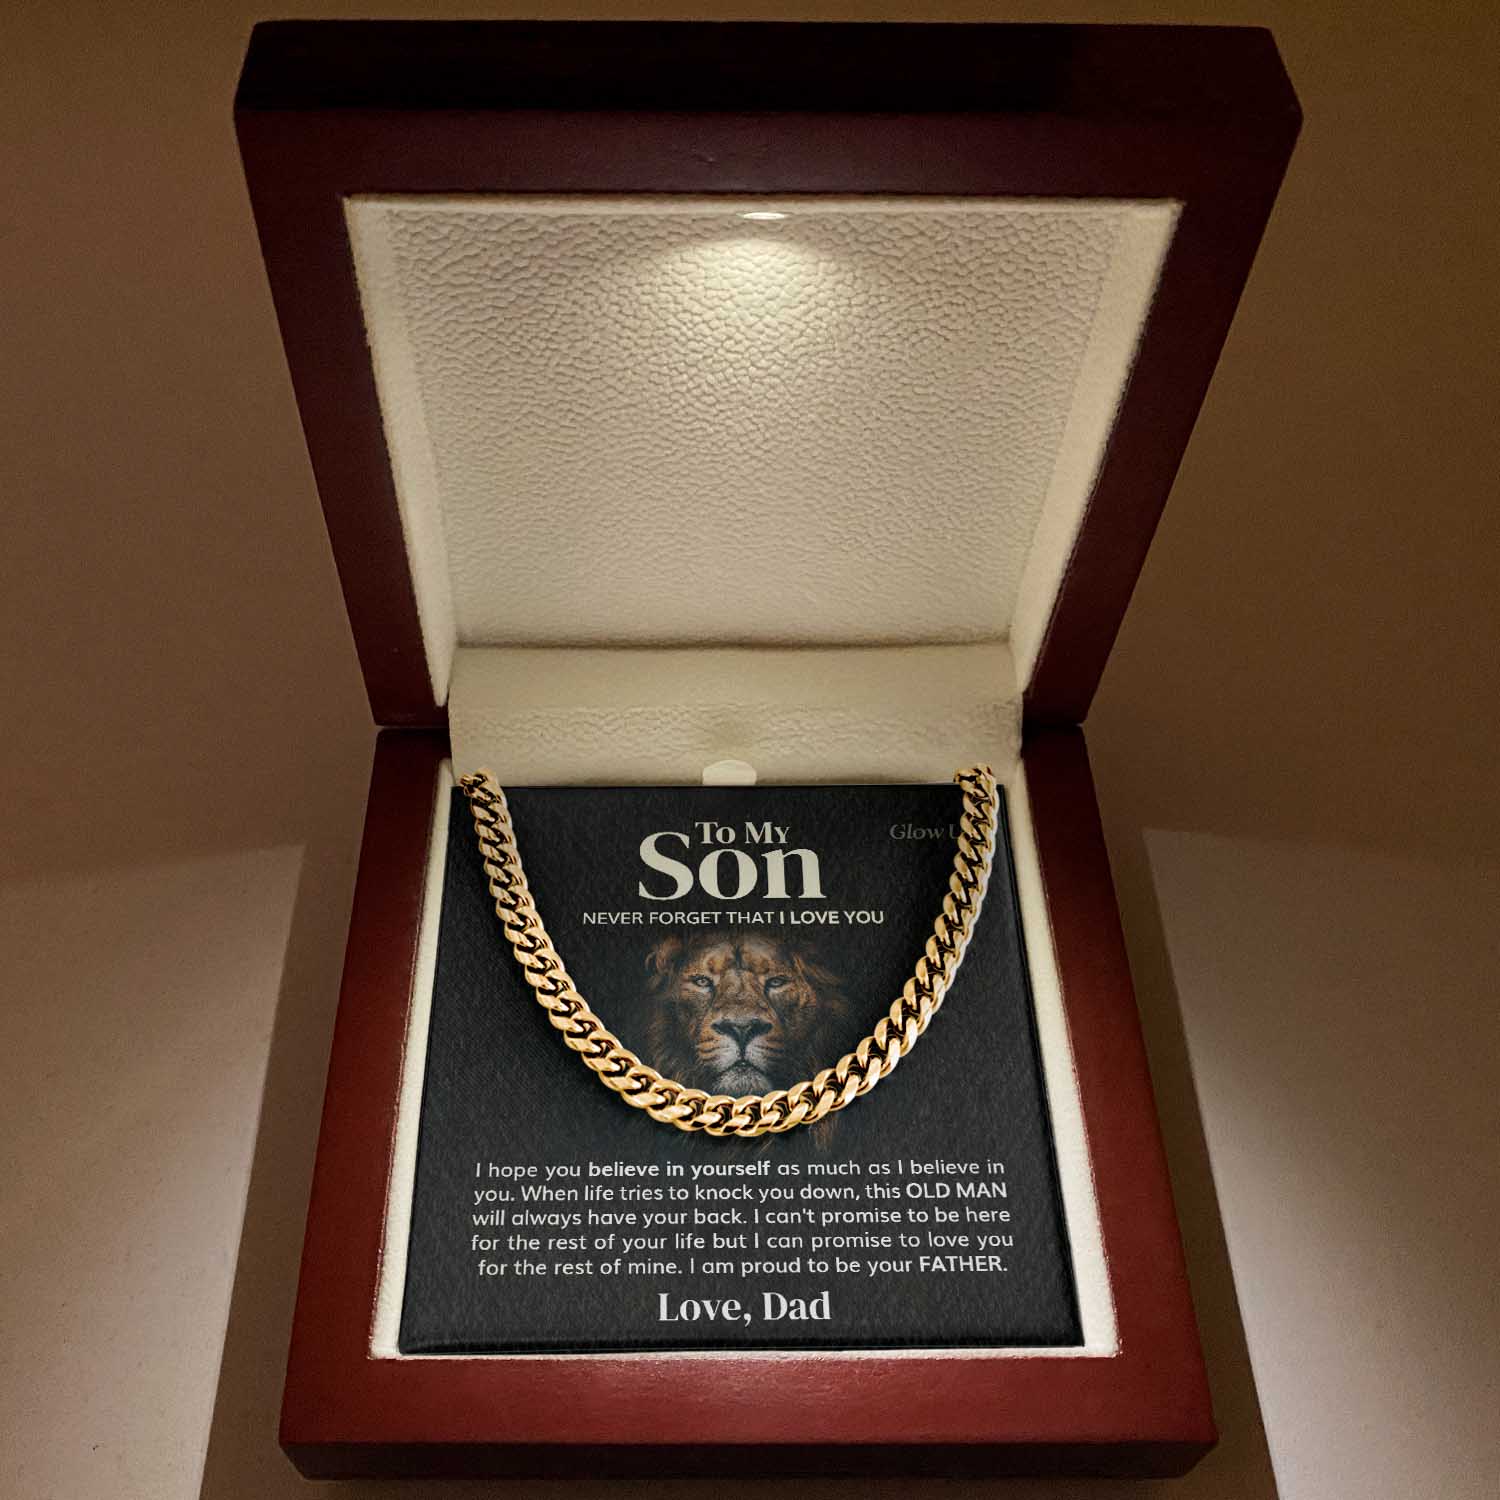 GlowUp Cuban Link Chain 18k Gold Finish / Luxury LED Box Believe in Yourself Cuban Chain Necklace | Strengthen Dad-Son Bond